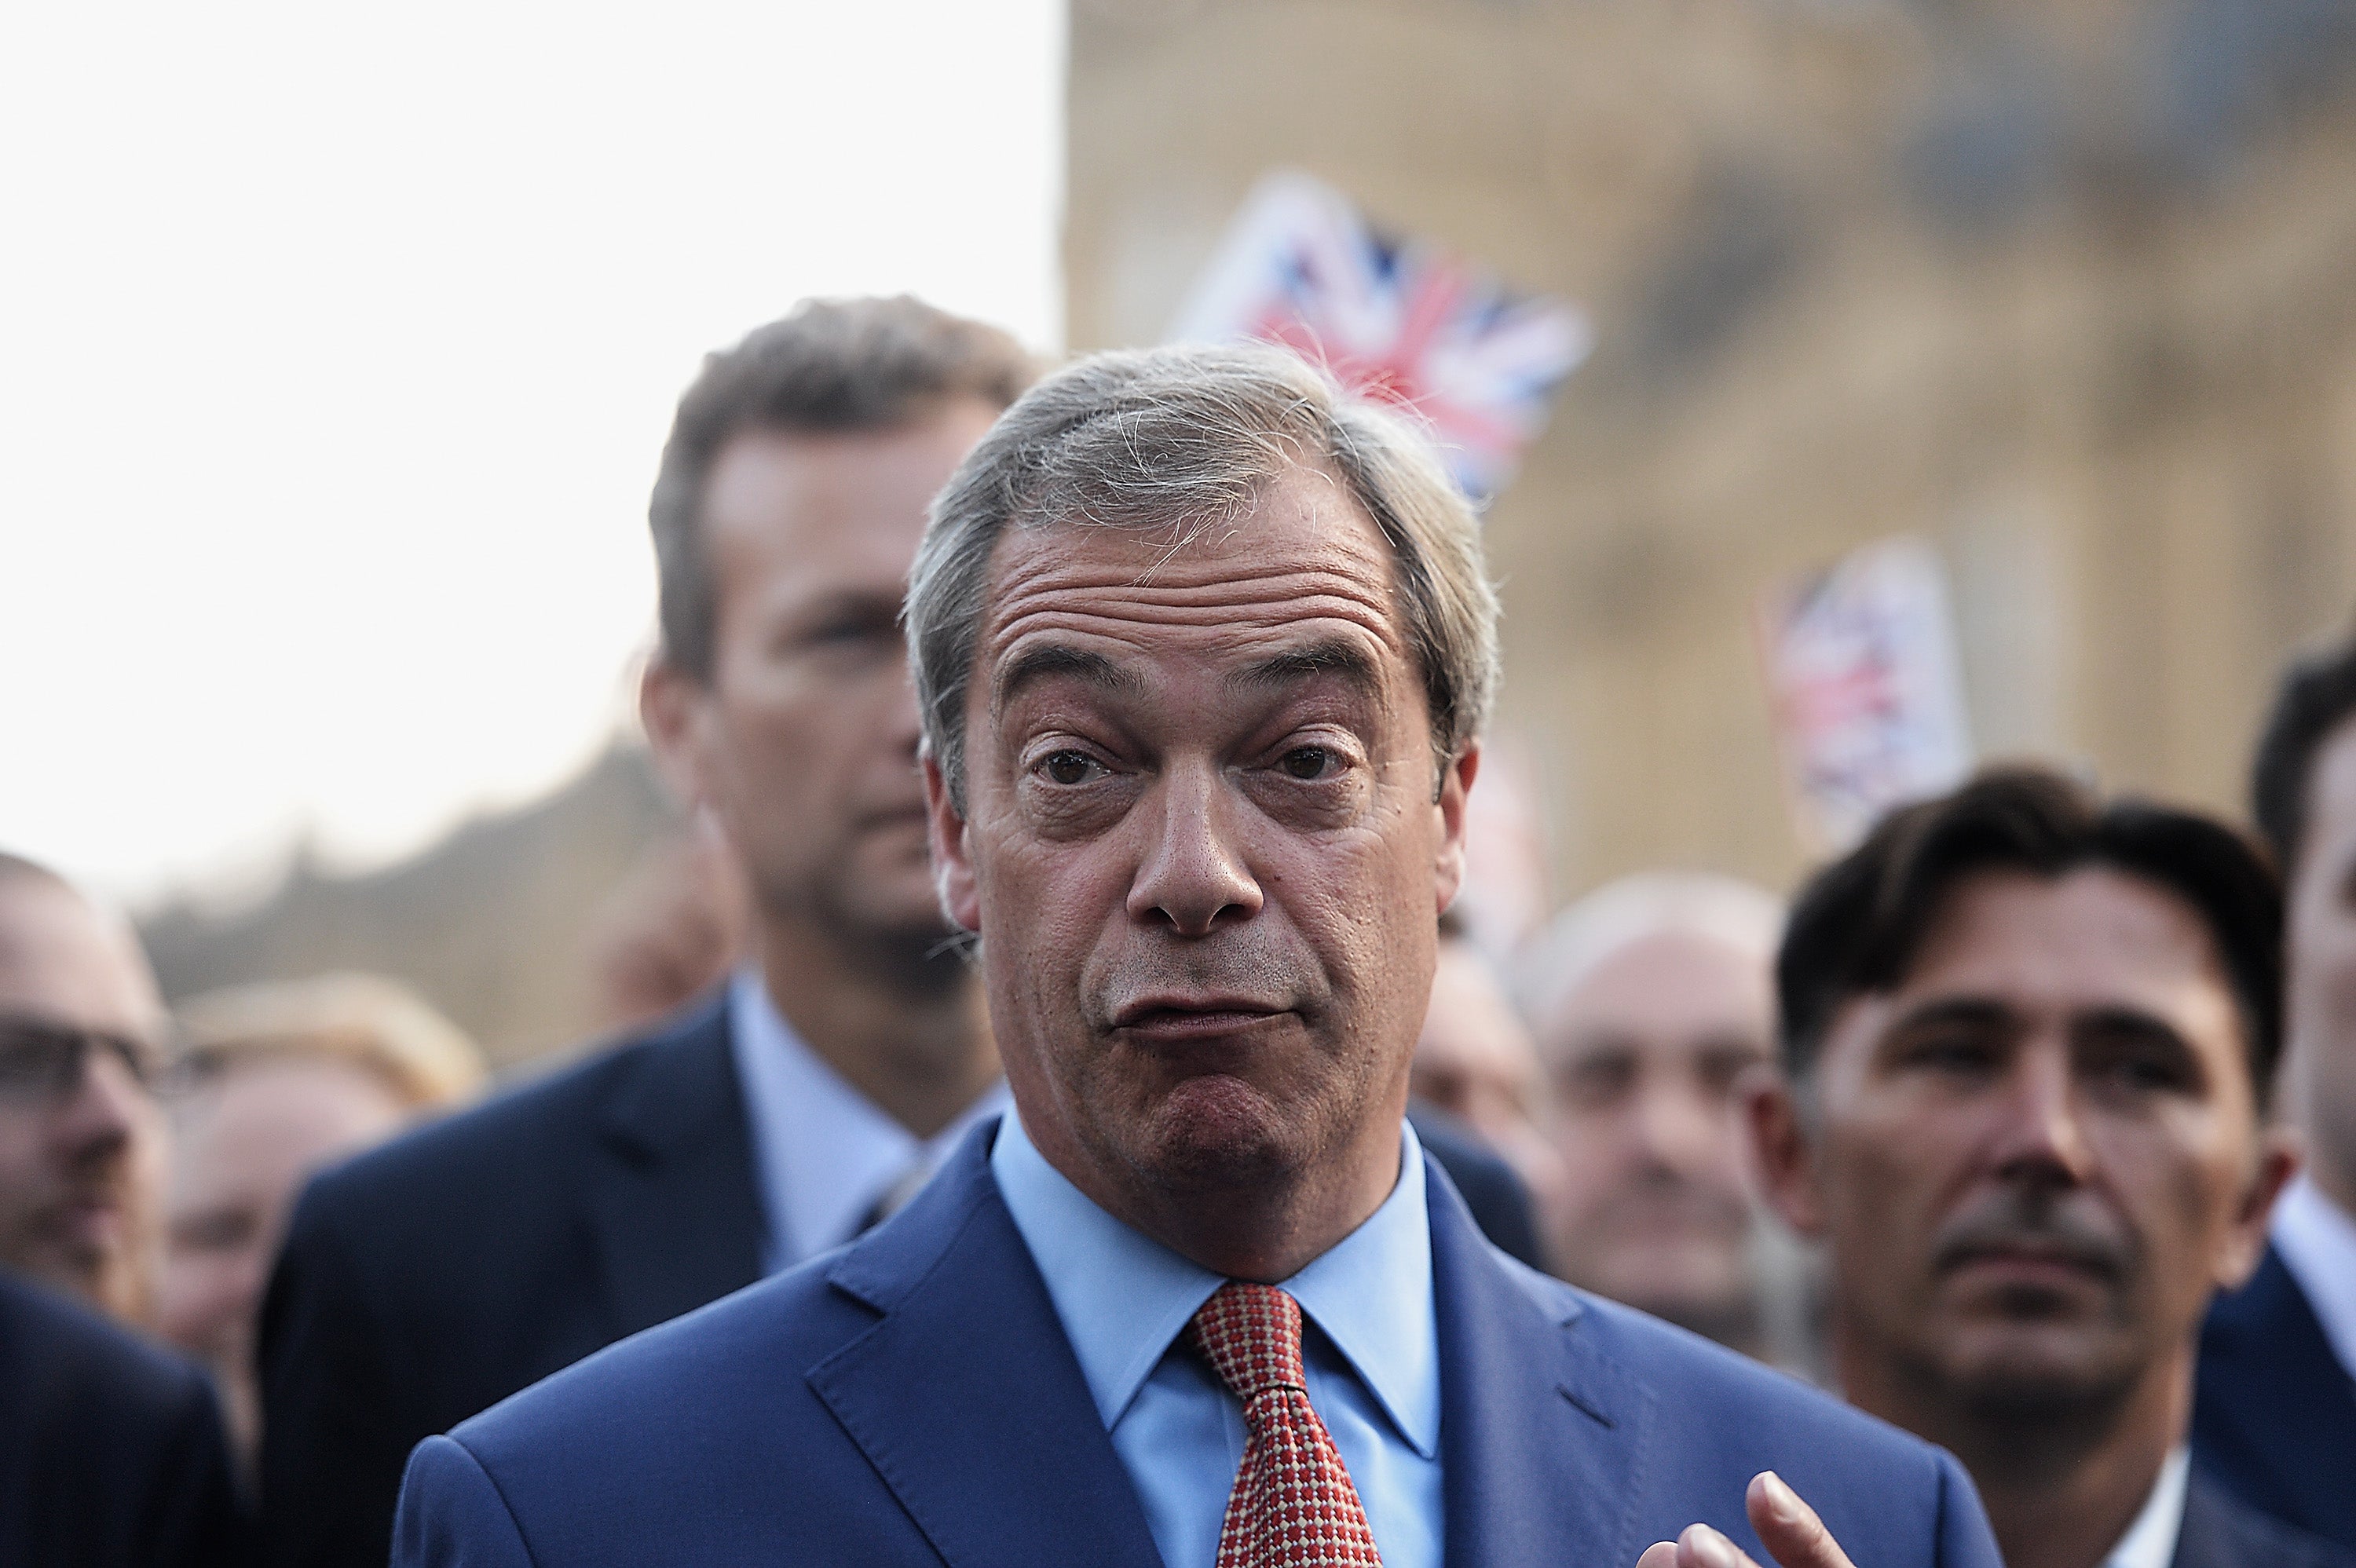 Ukip, the Brexit Party and now Reform aims to put pressure on the Conservative Party by threatening to steal its votes